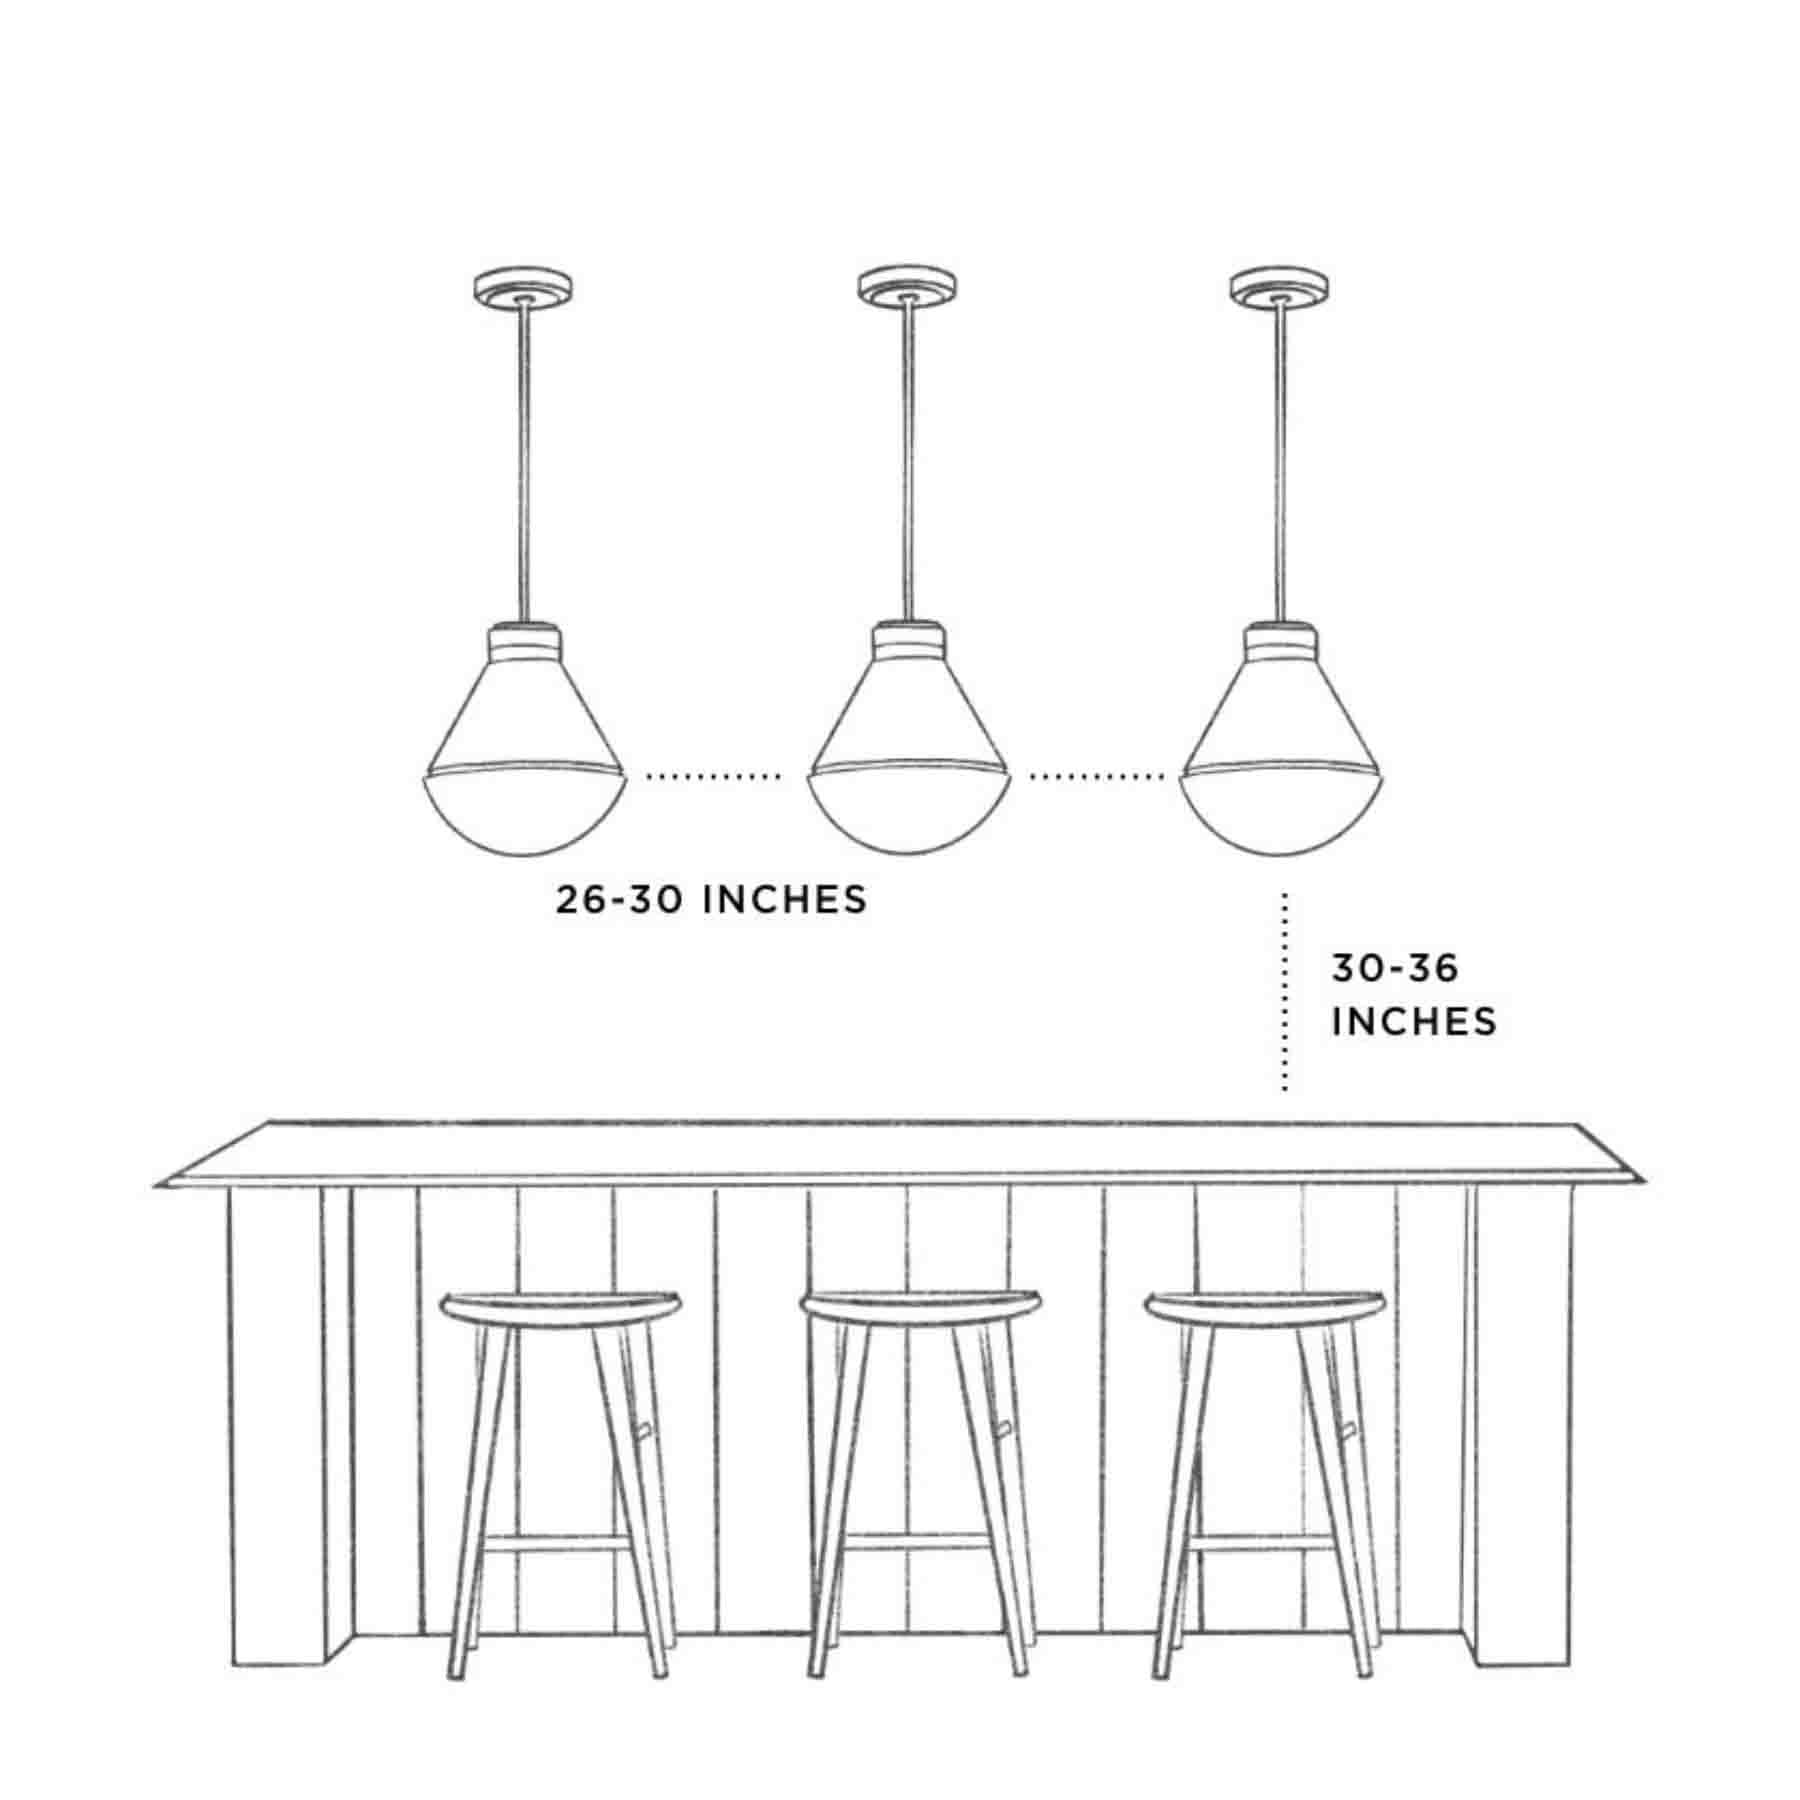 how to choose rattan pendant light for kitchen island